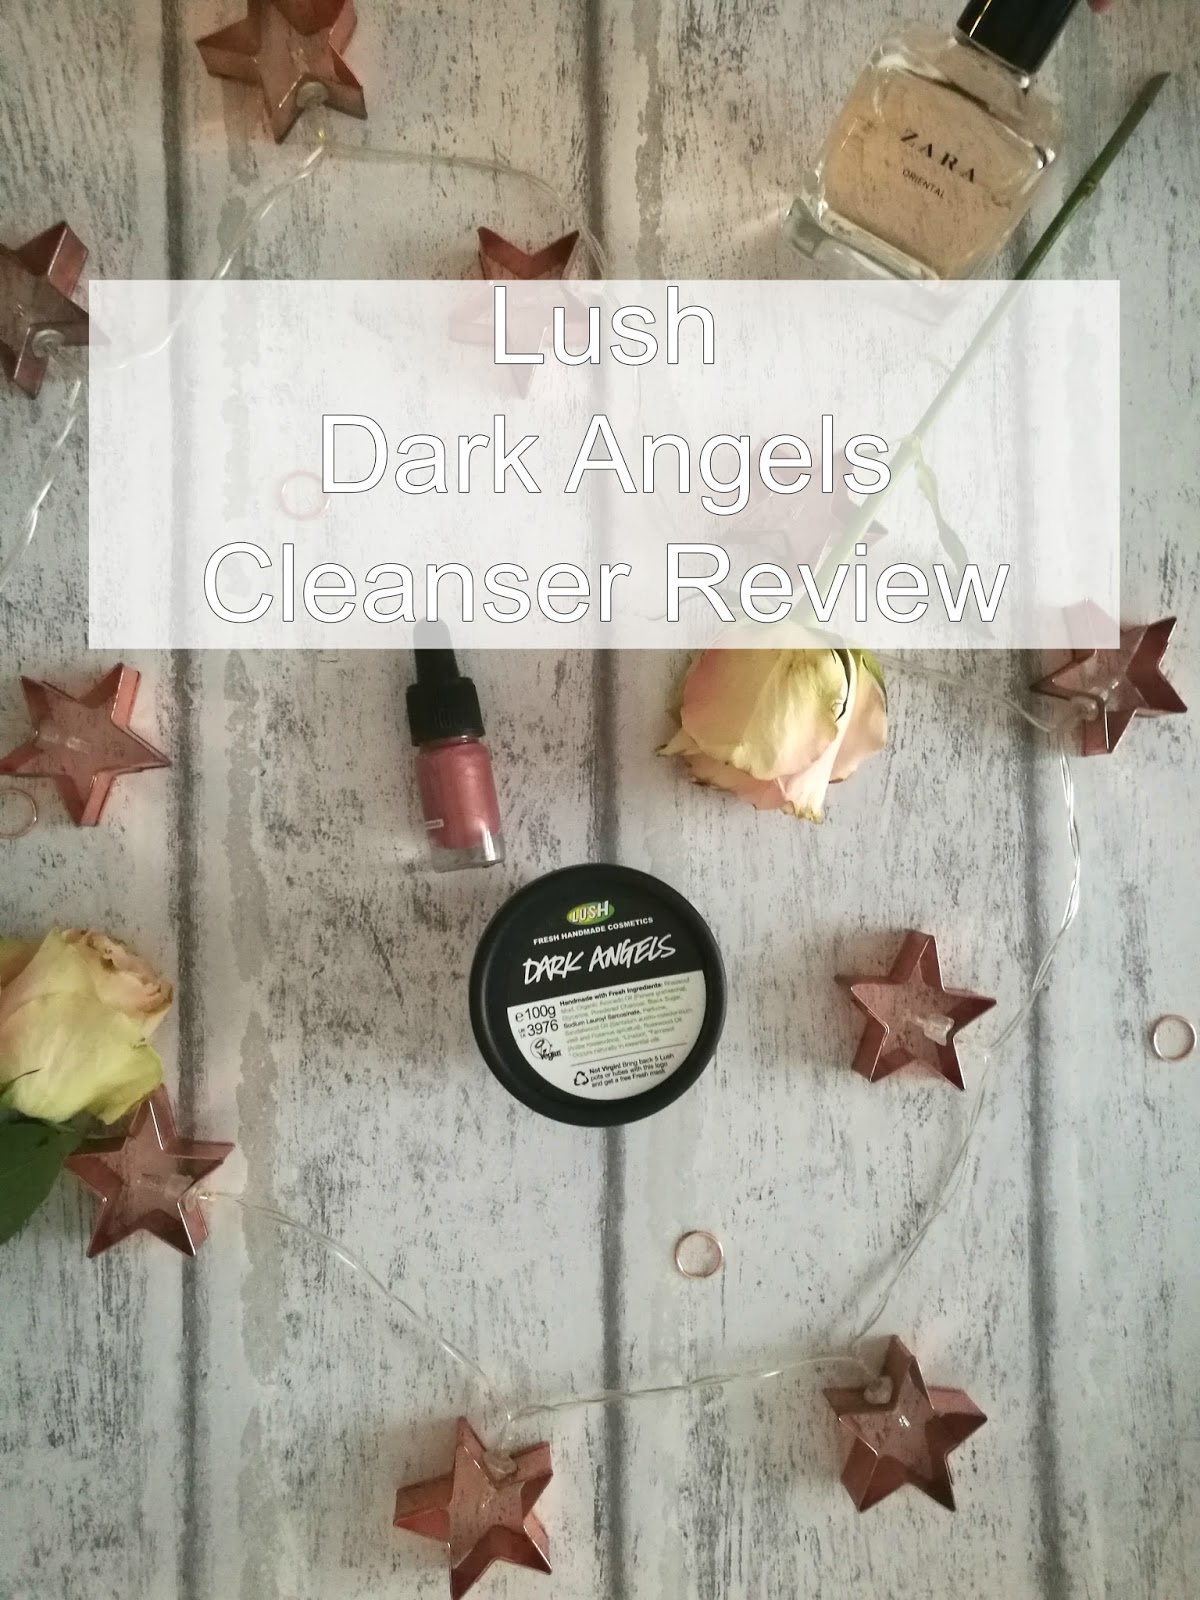 Beauty Review - Lush Dark Angels Cleanser